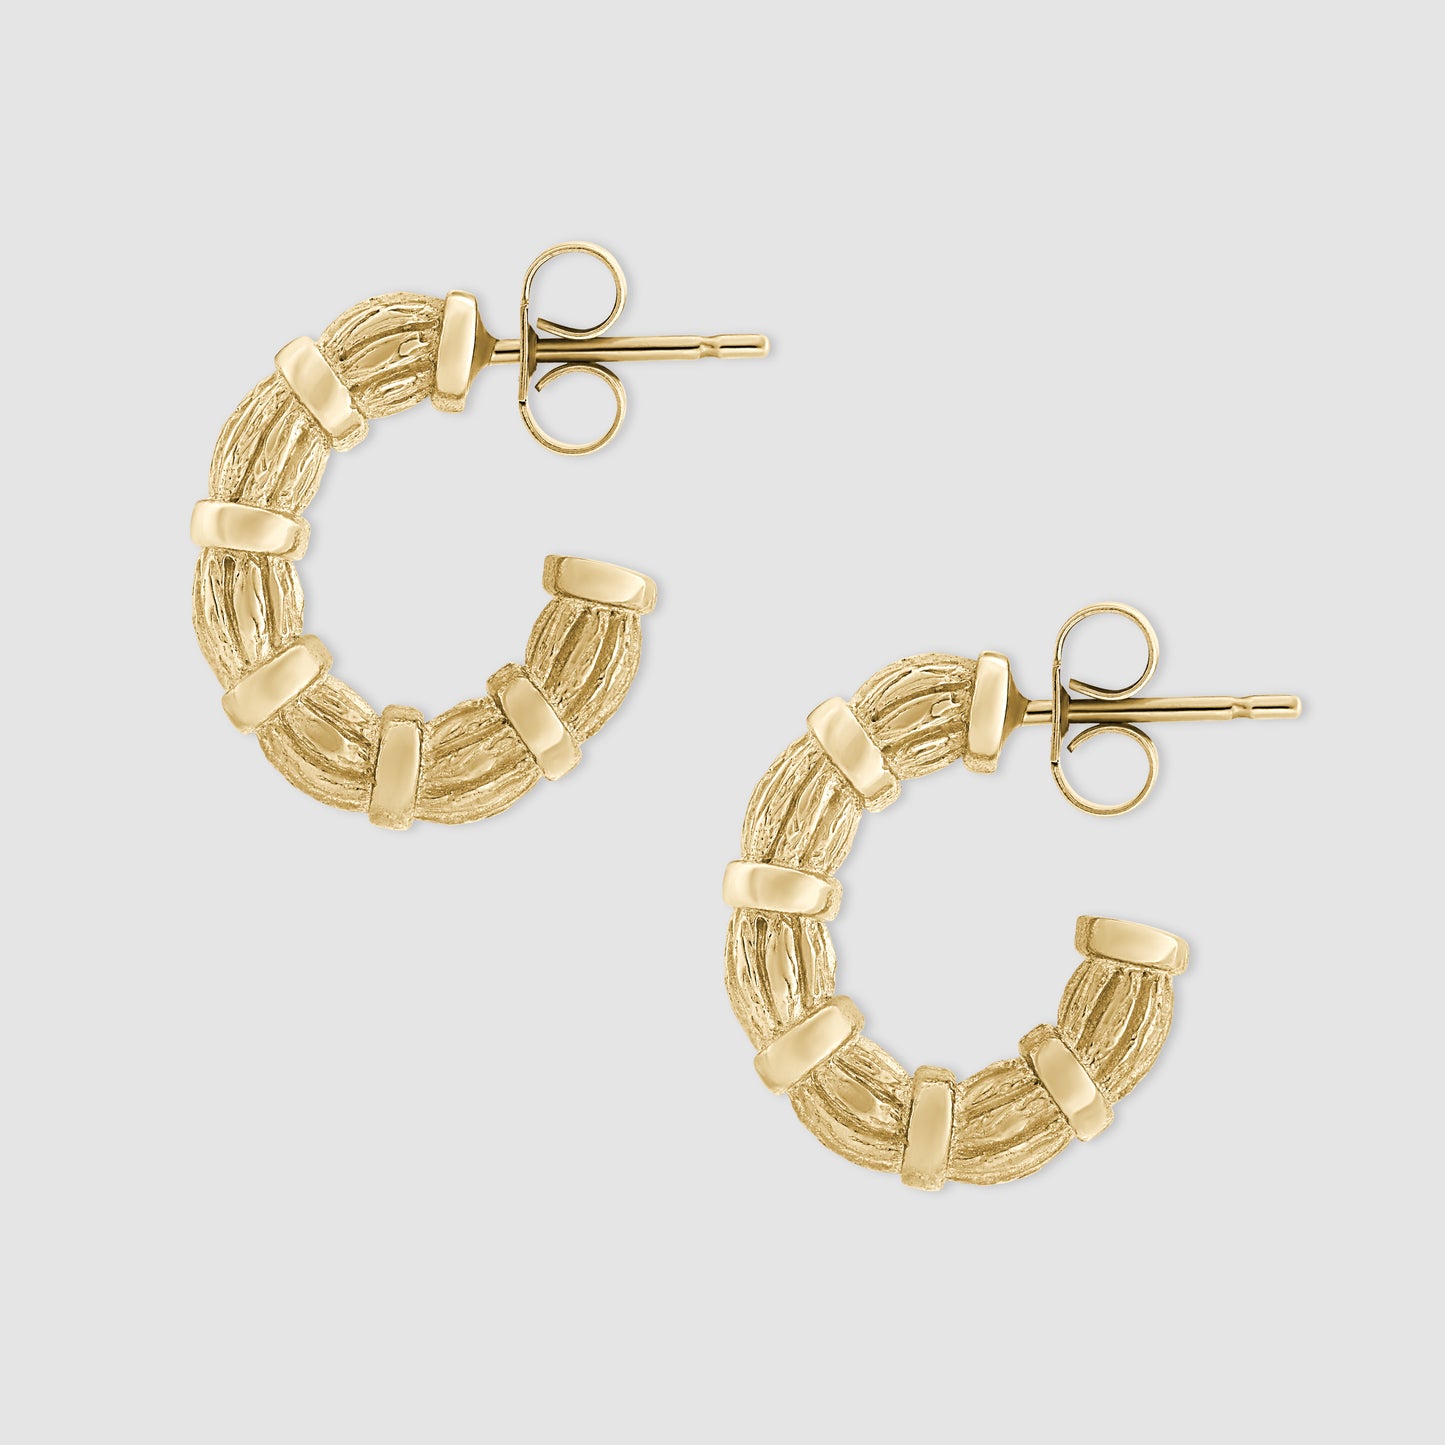 Bound Willow Earrings - Gold